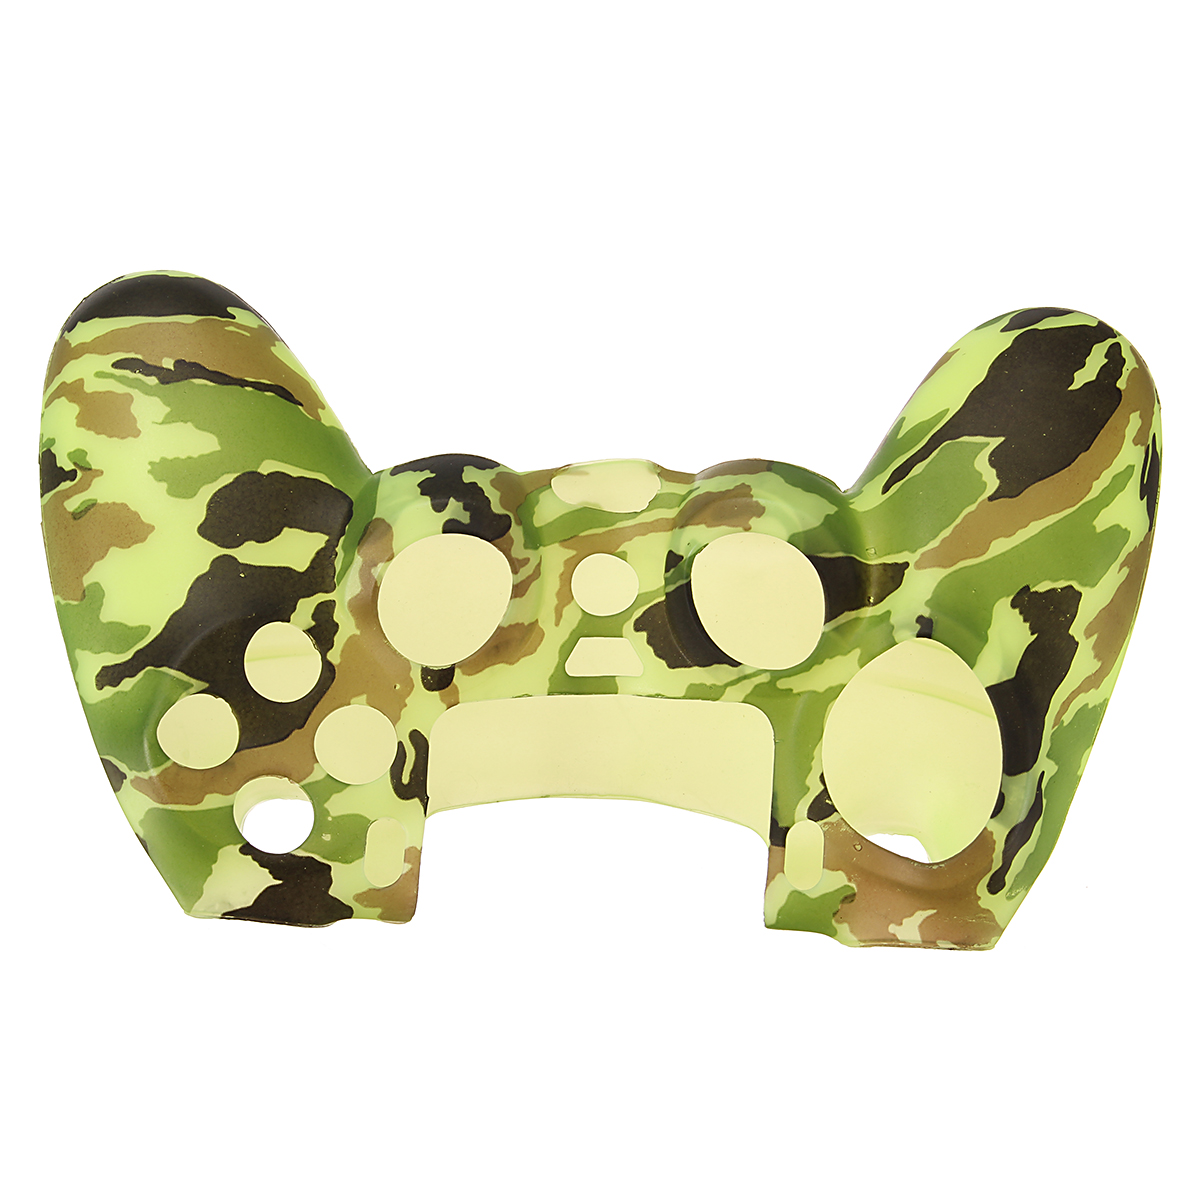 Durable Decal Camouflage Grip Cover Case Silicone Rubber Soft Skin Protector for Playstation 4 for Dualshock 4 Gamepad 26